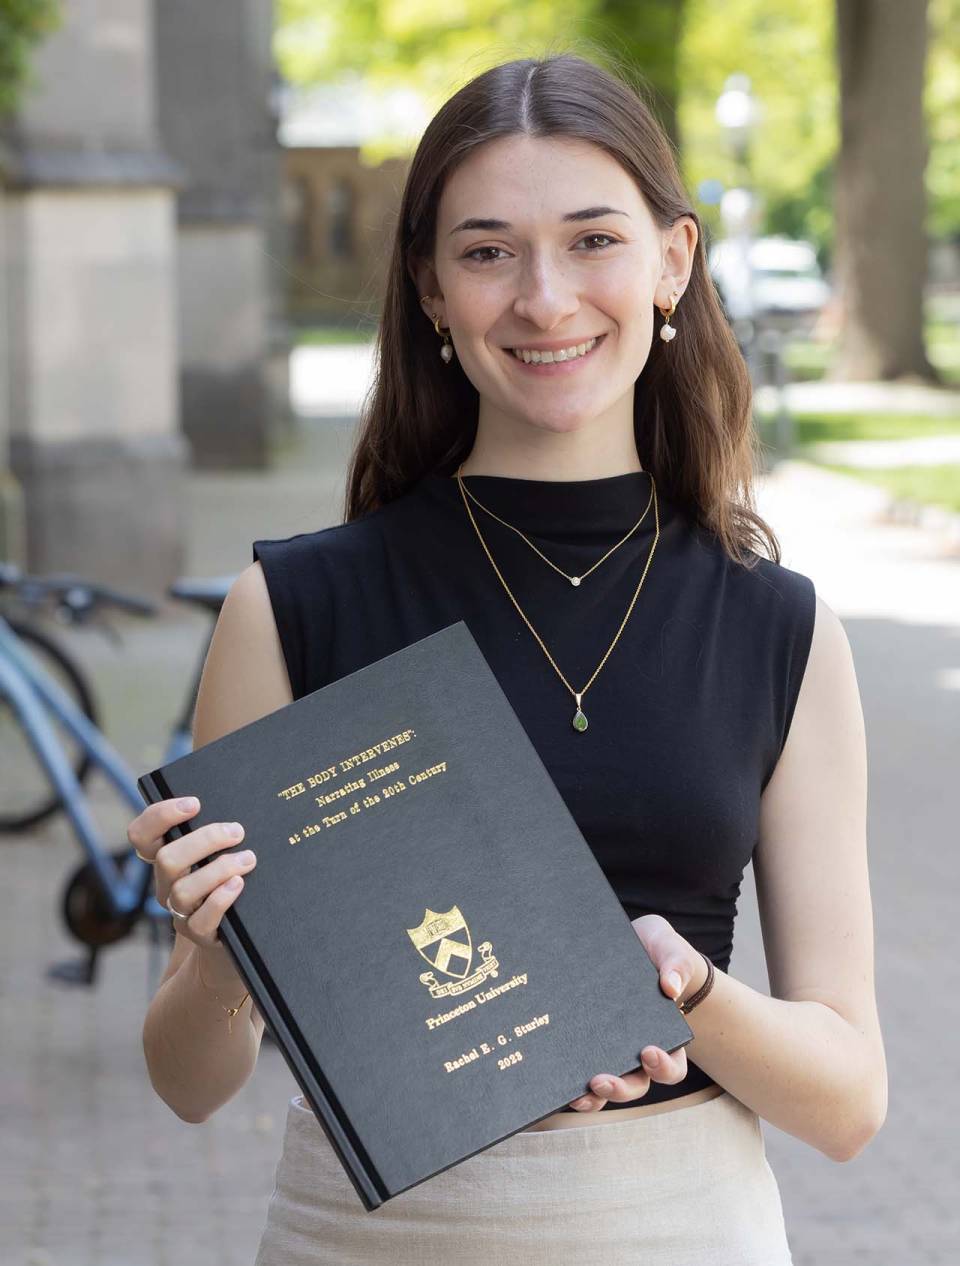 Rachel Sturley smiling while holding her thesis book.